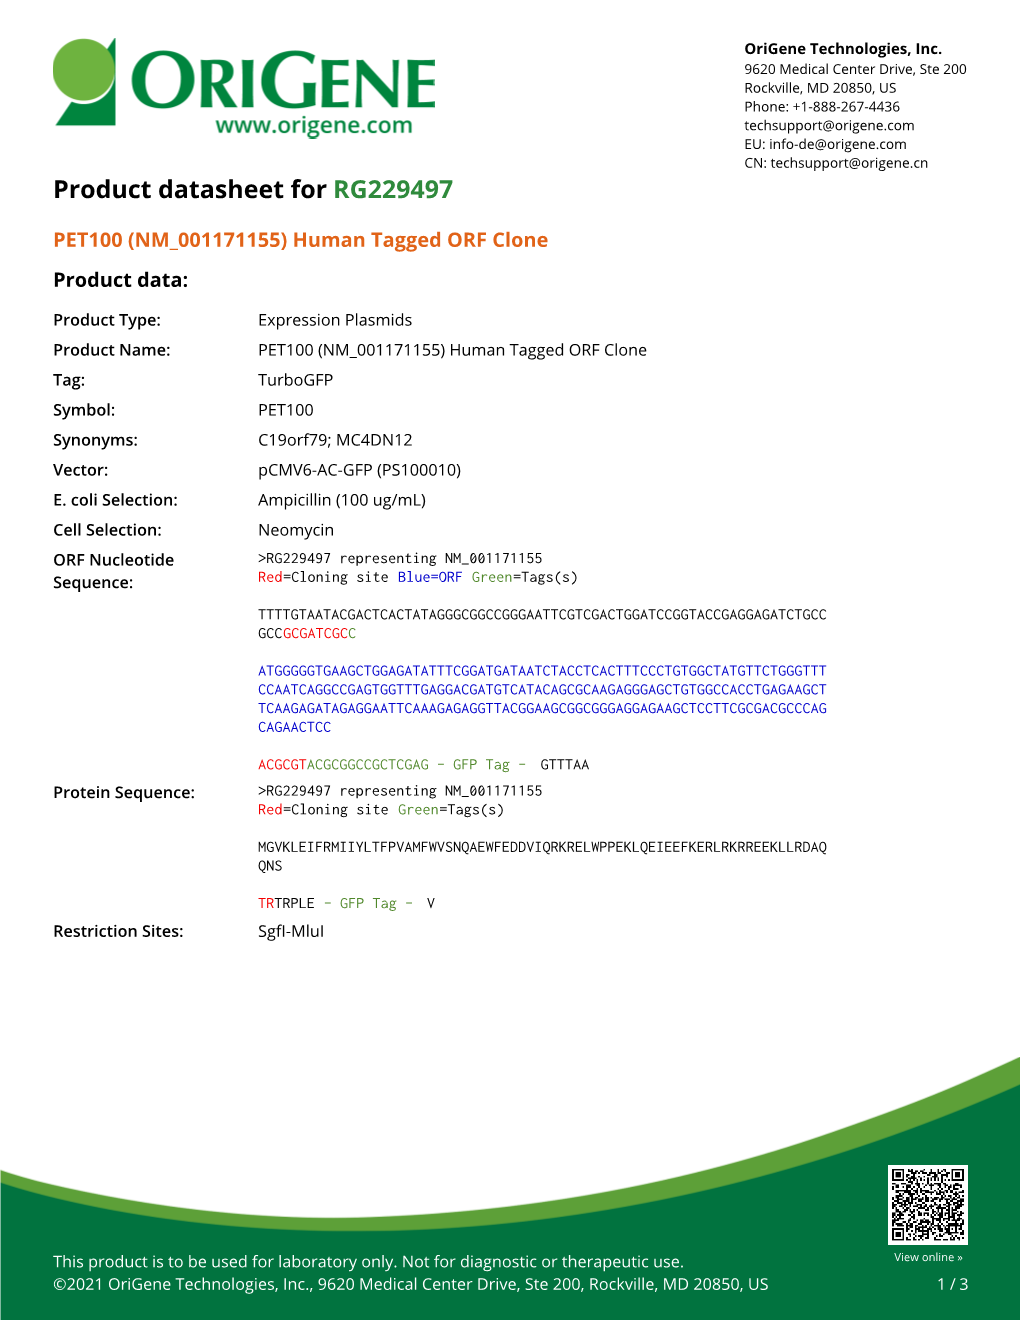 PET100 (NM 001171155) Human Tagged ORF Clone Product Data